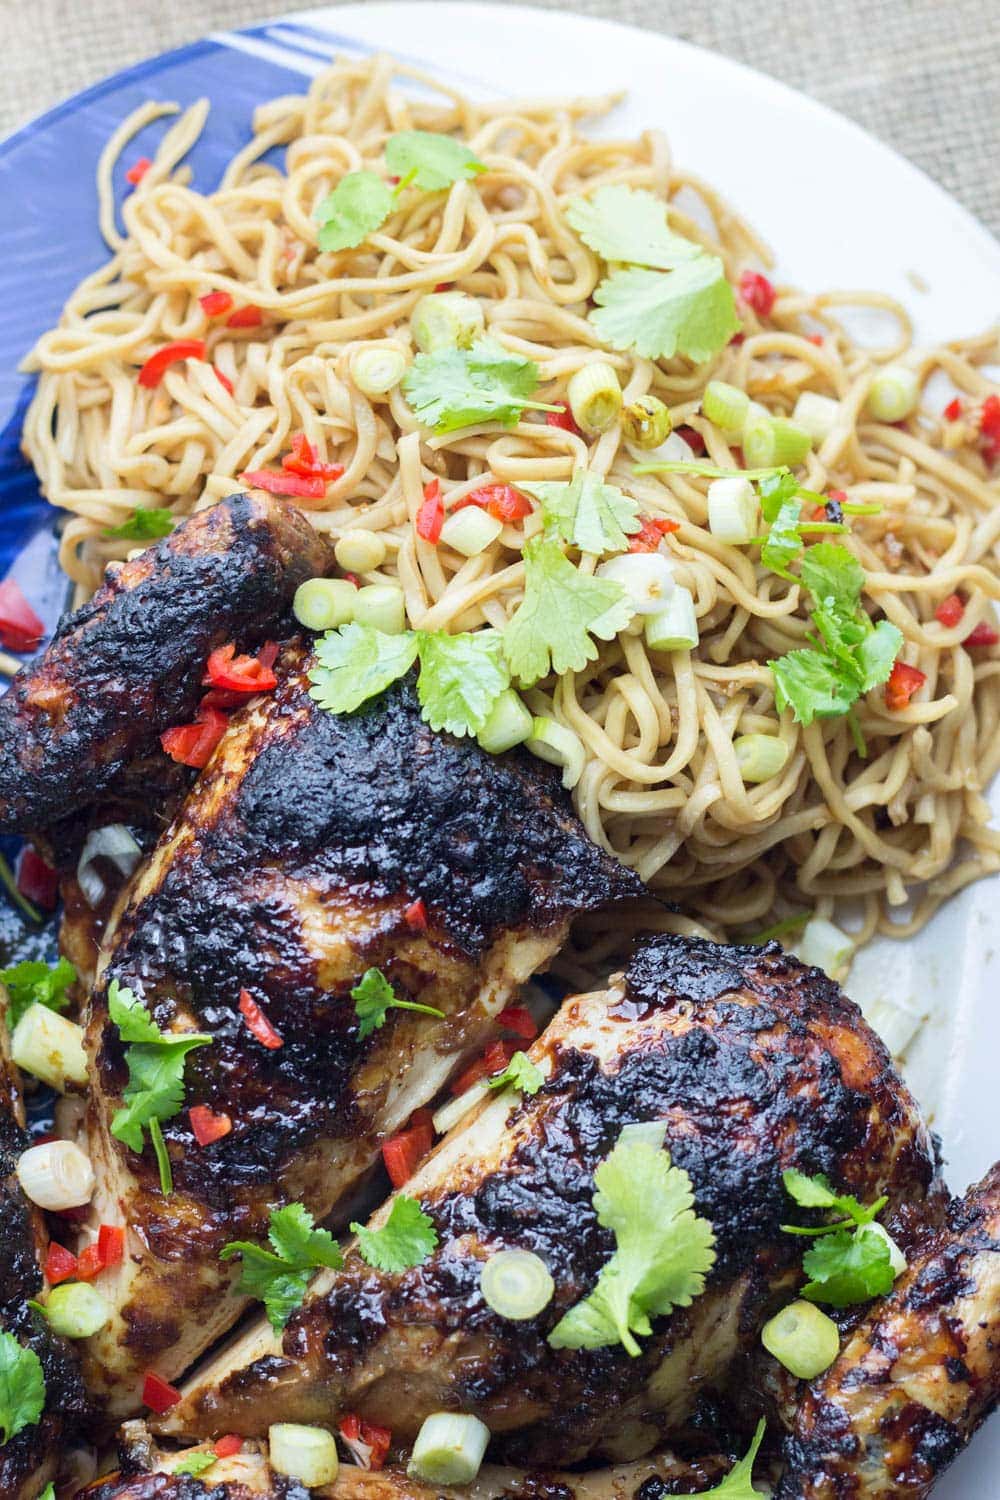 Asian Roasted Spatchcock Chicken with Noodle Salad. This Asian roasted spatchcock chicken is a great way to mix up a roast dinner. I love mine served with a refreshing noodle salad. #roastchicken #recipe #asianfood #spatchcock